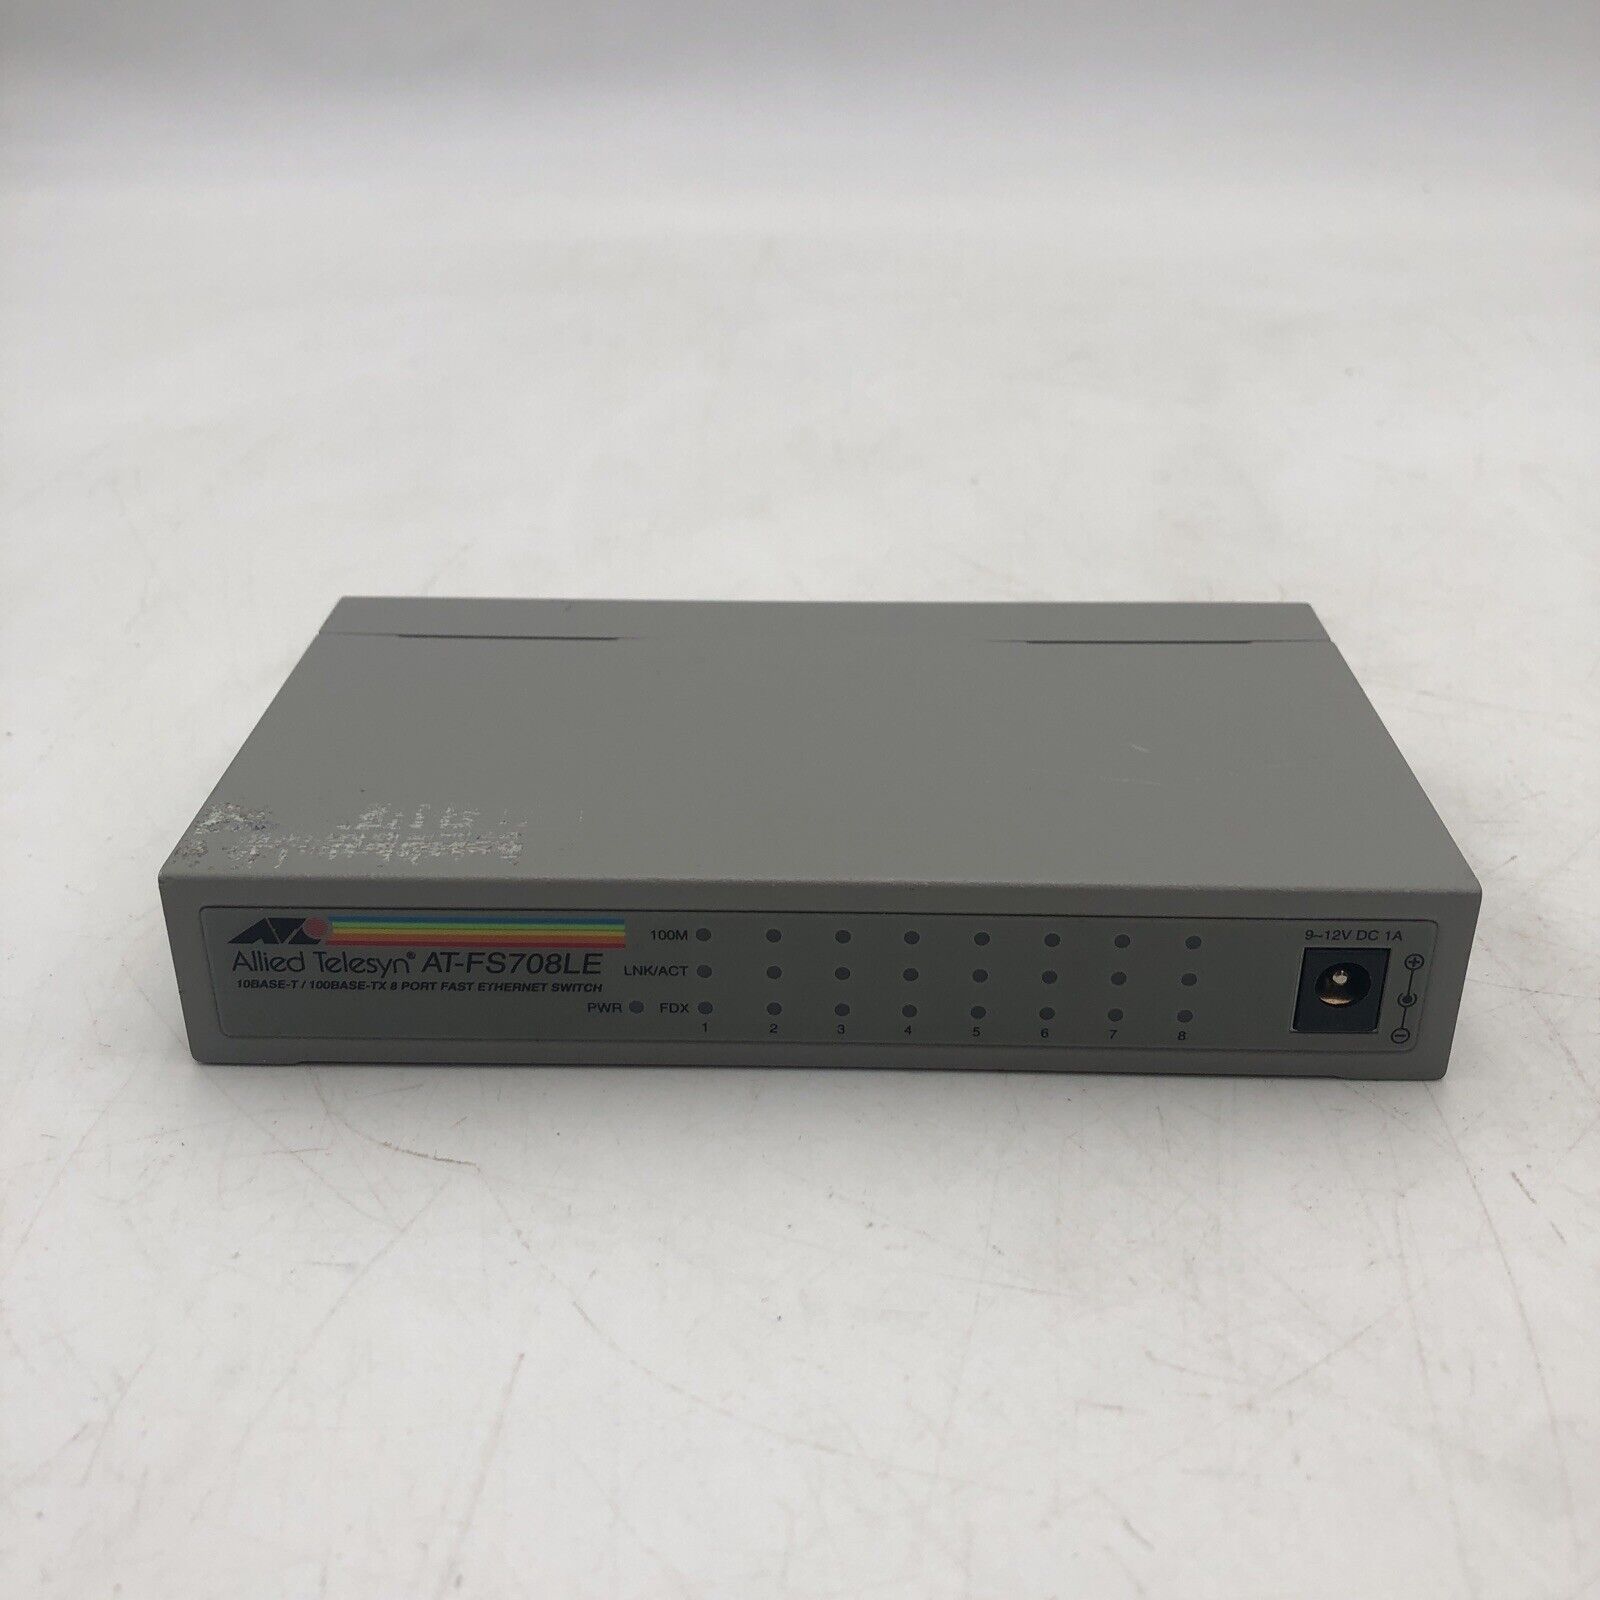 Allied Telesyn AT-FS708LE Fast Ethernet Switch 8 Port TESTED FOR POWER READ.